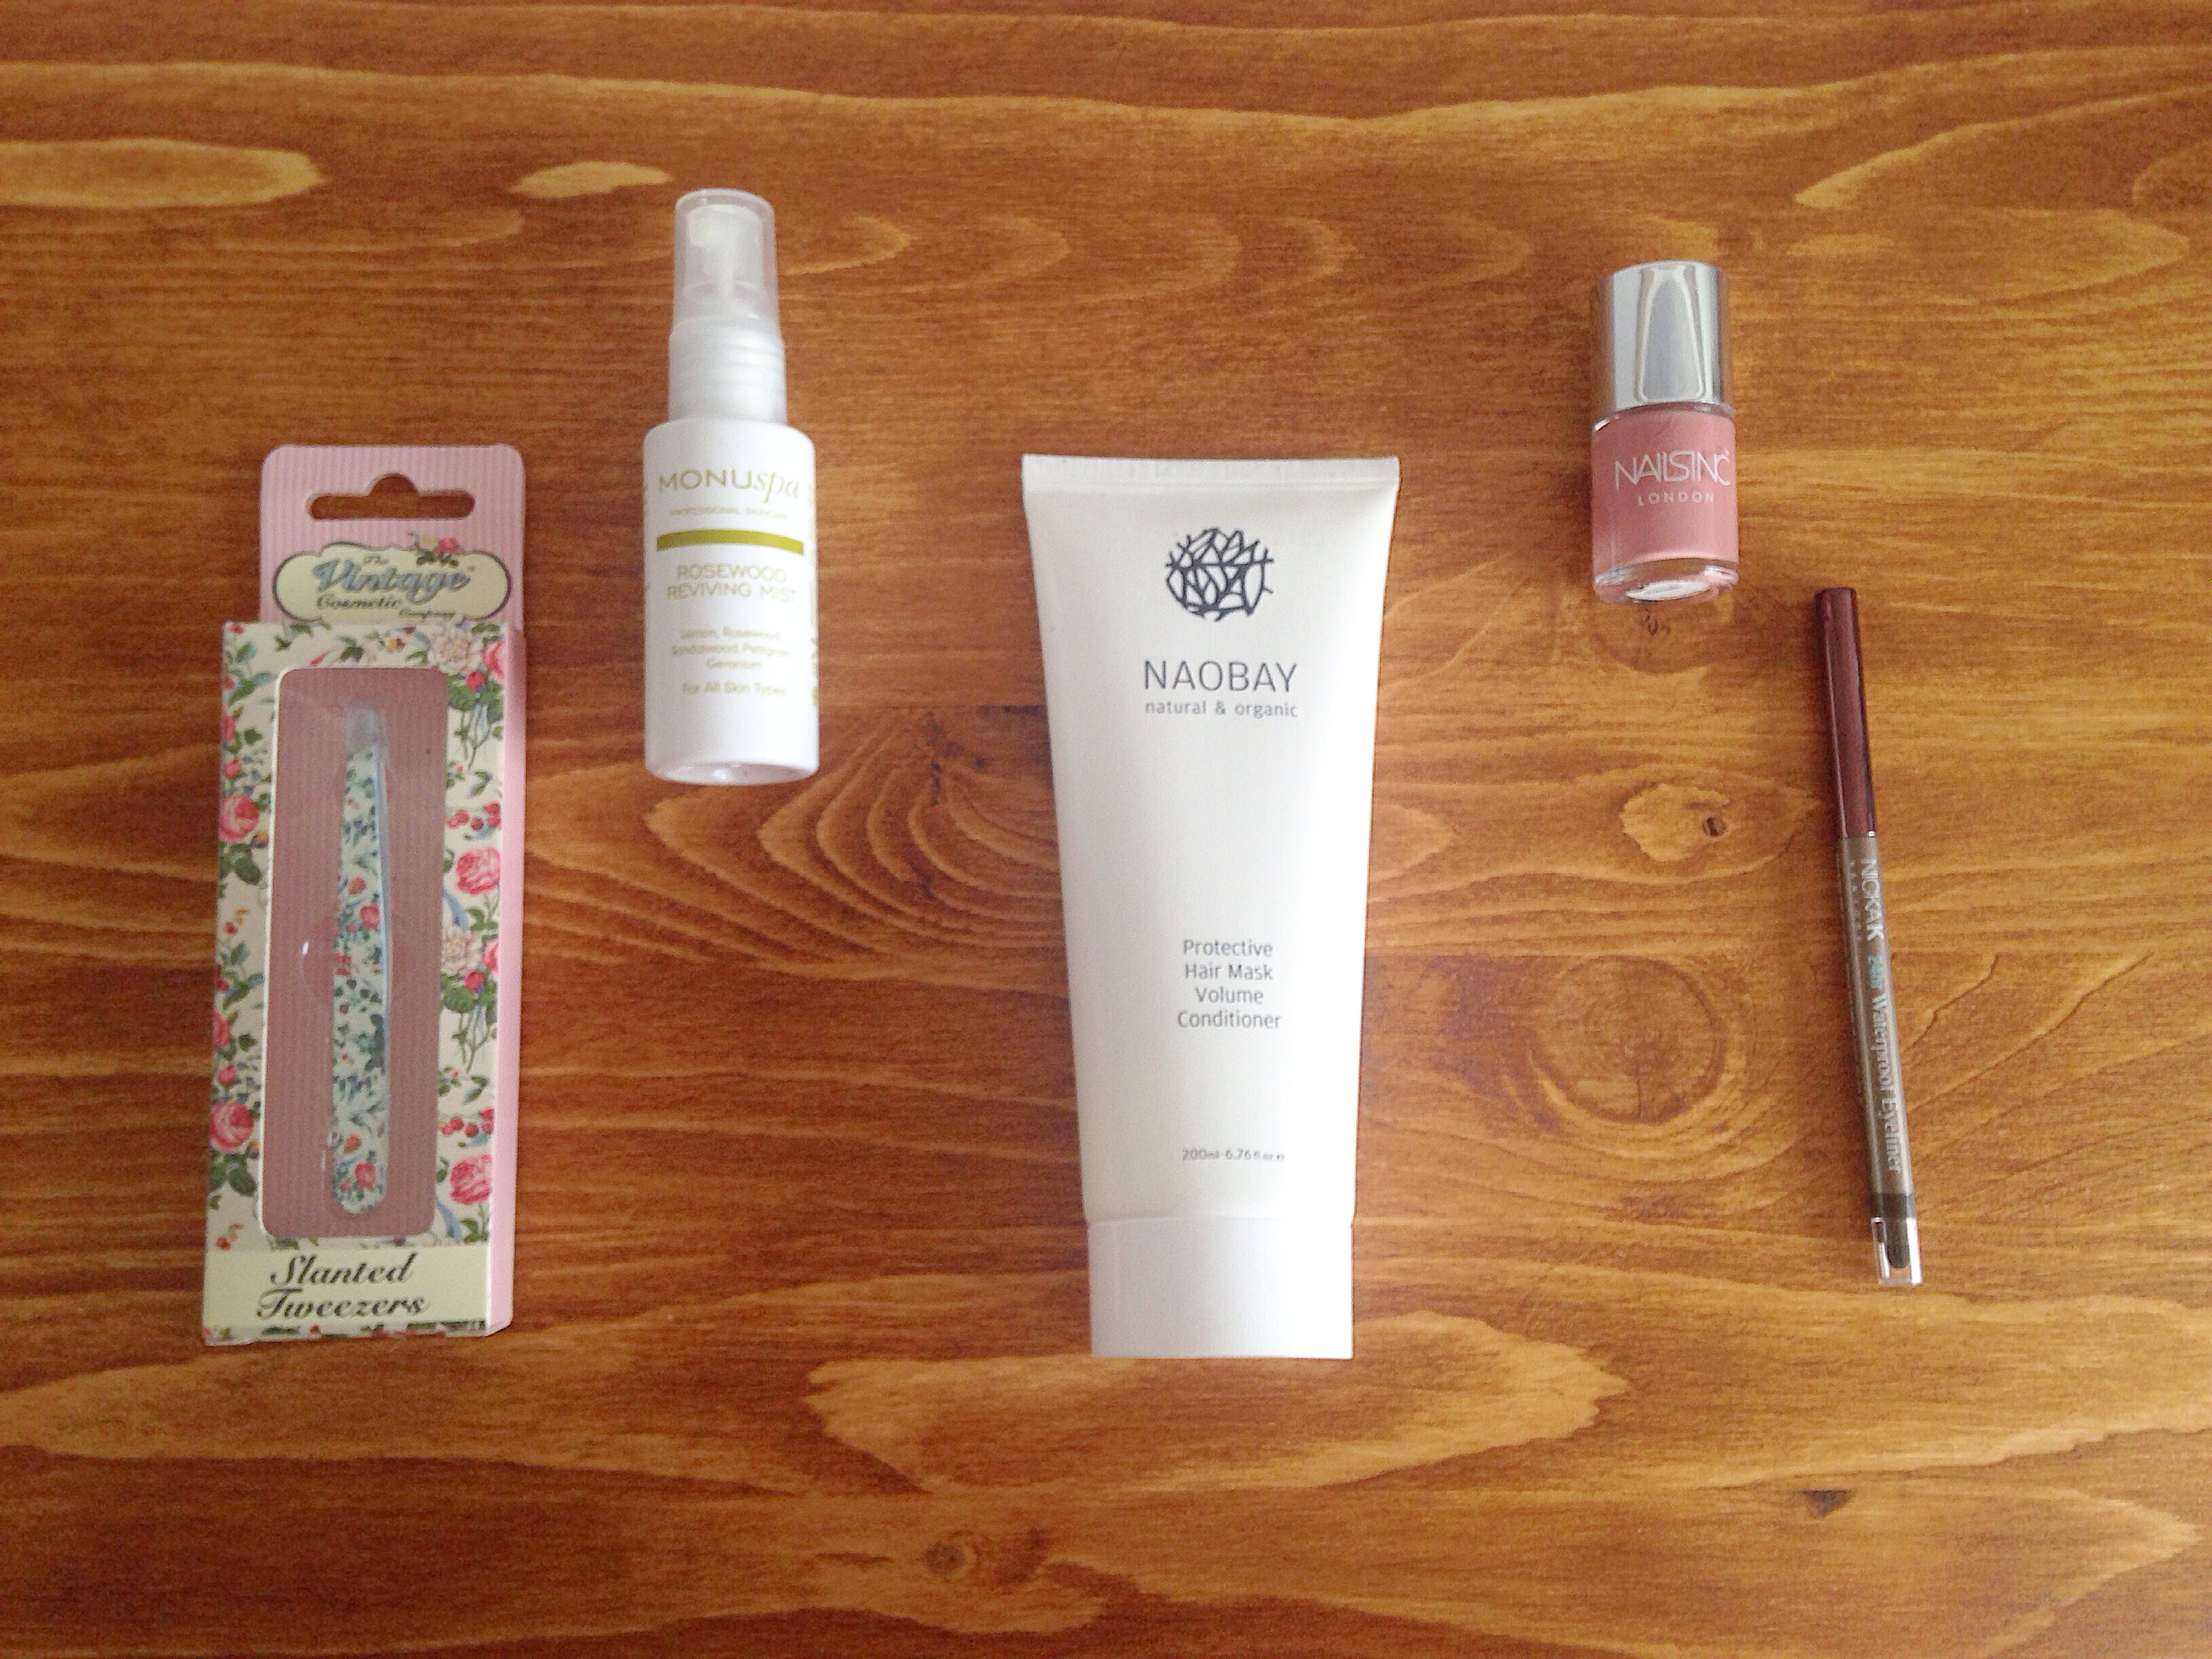 April Glossybox contents